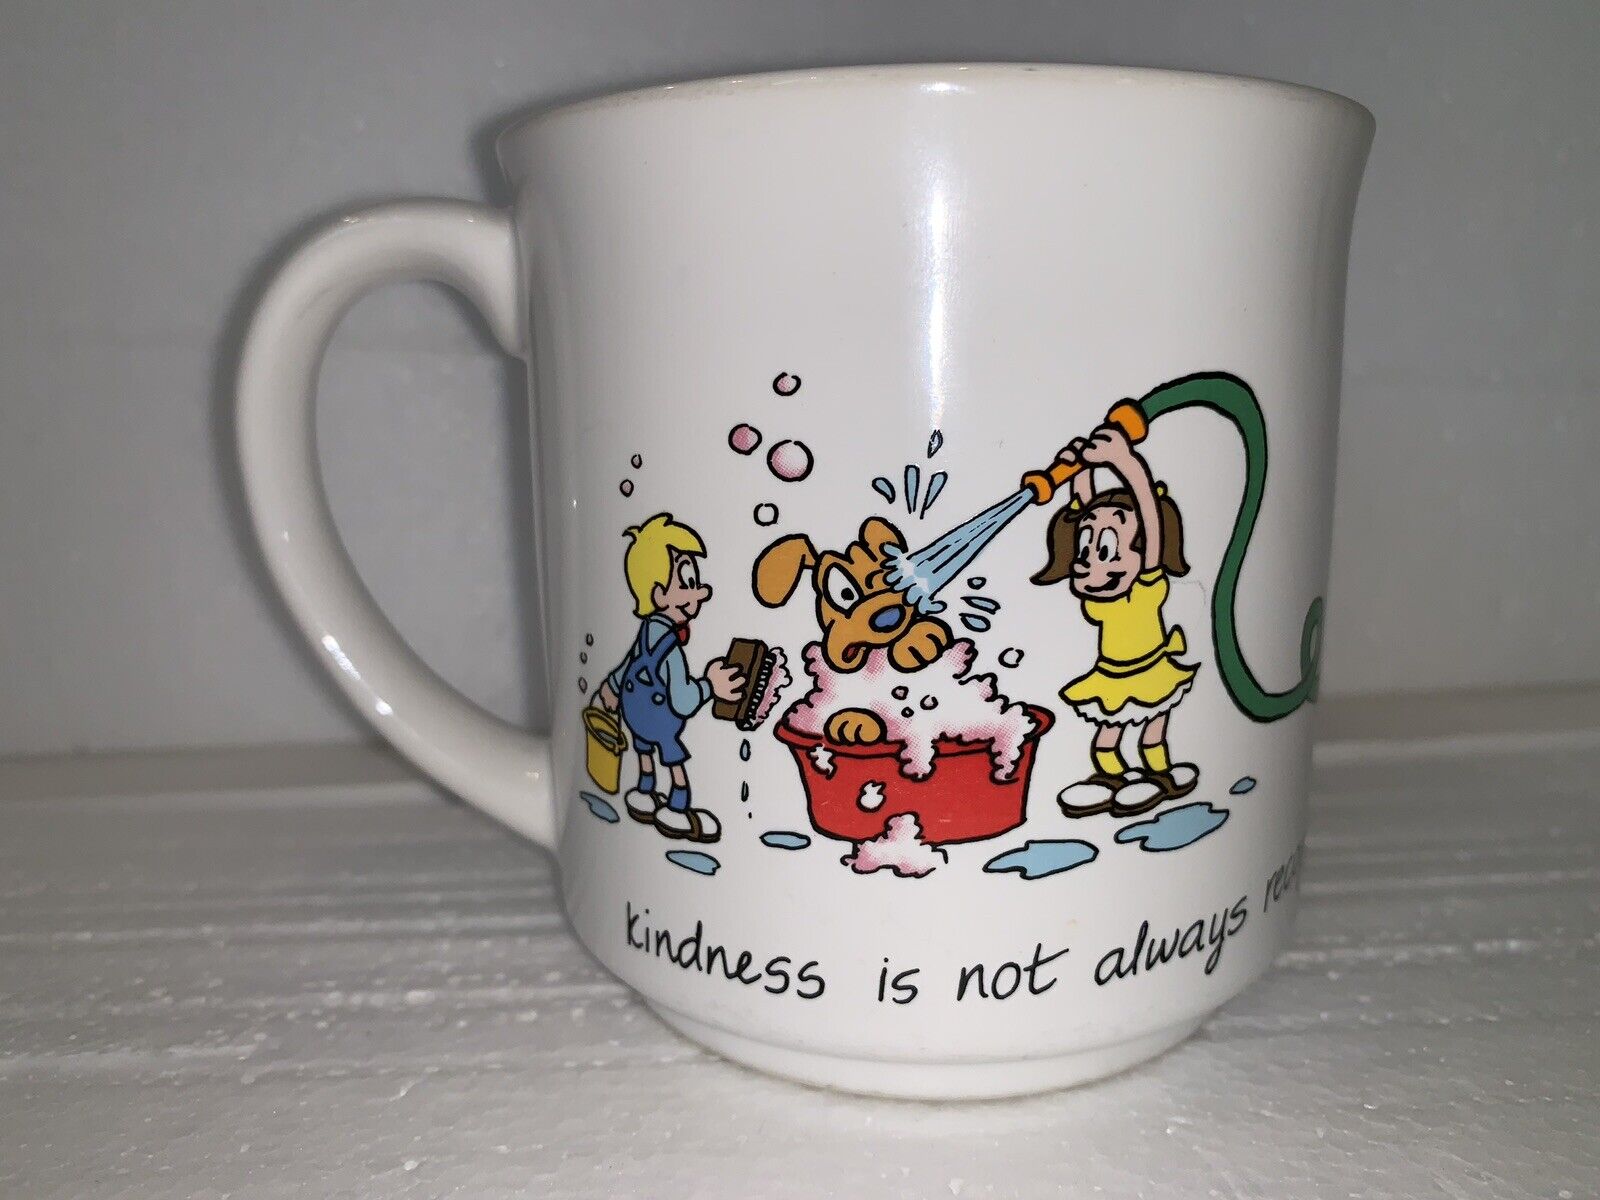 Music Machine Coffee Mug #9 Kindness Fruits Of The Spirit Collection Vintage Cup